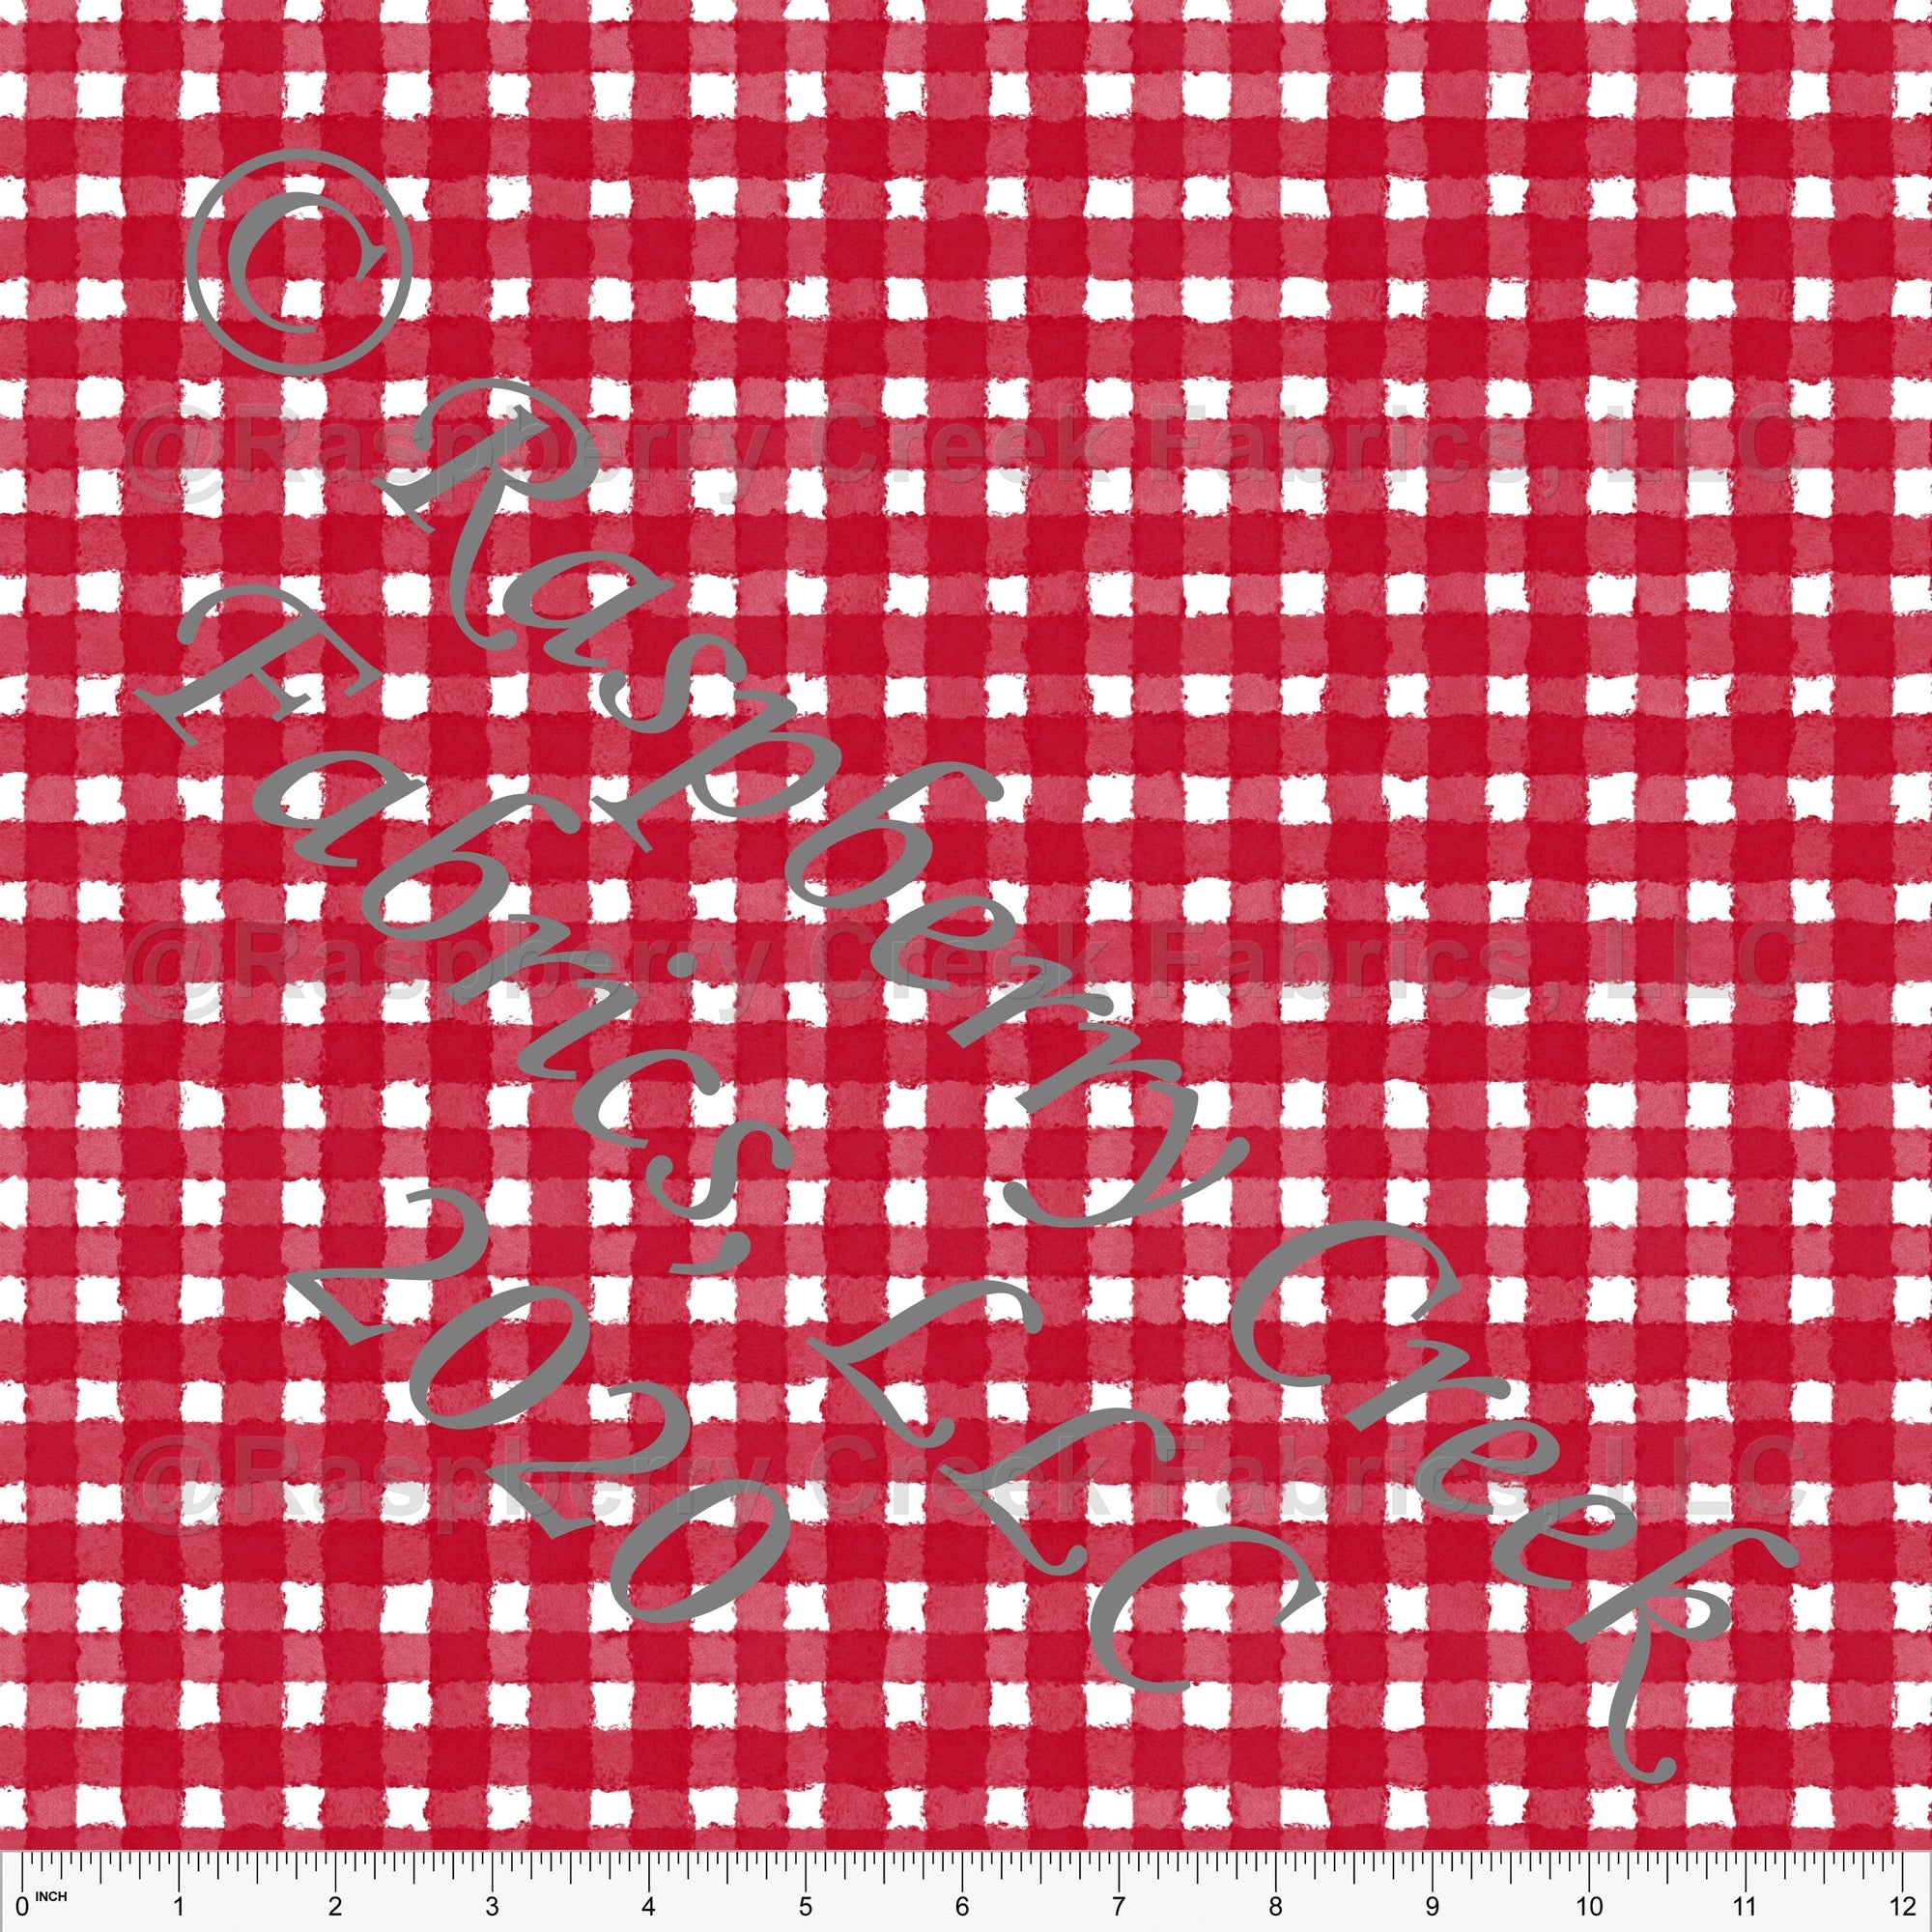 Red and White Painted Check Gingham, By Bri Powell for Club Fabrics Fabric, Raspberry Creek Fabrics, watermarked